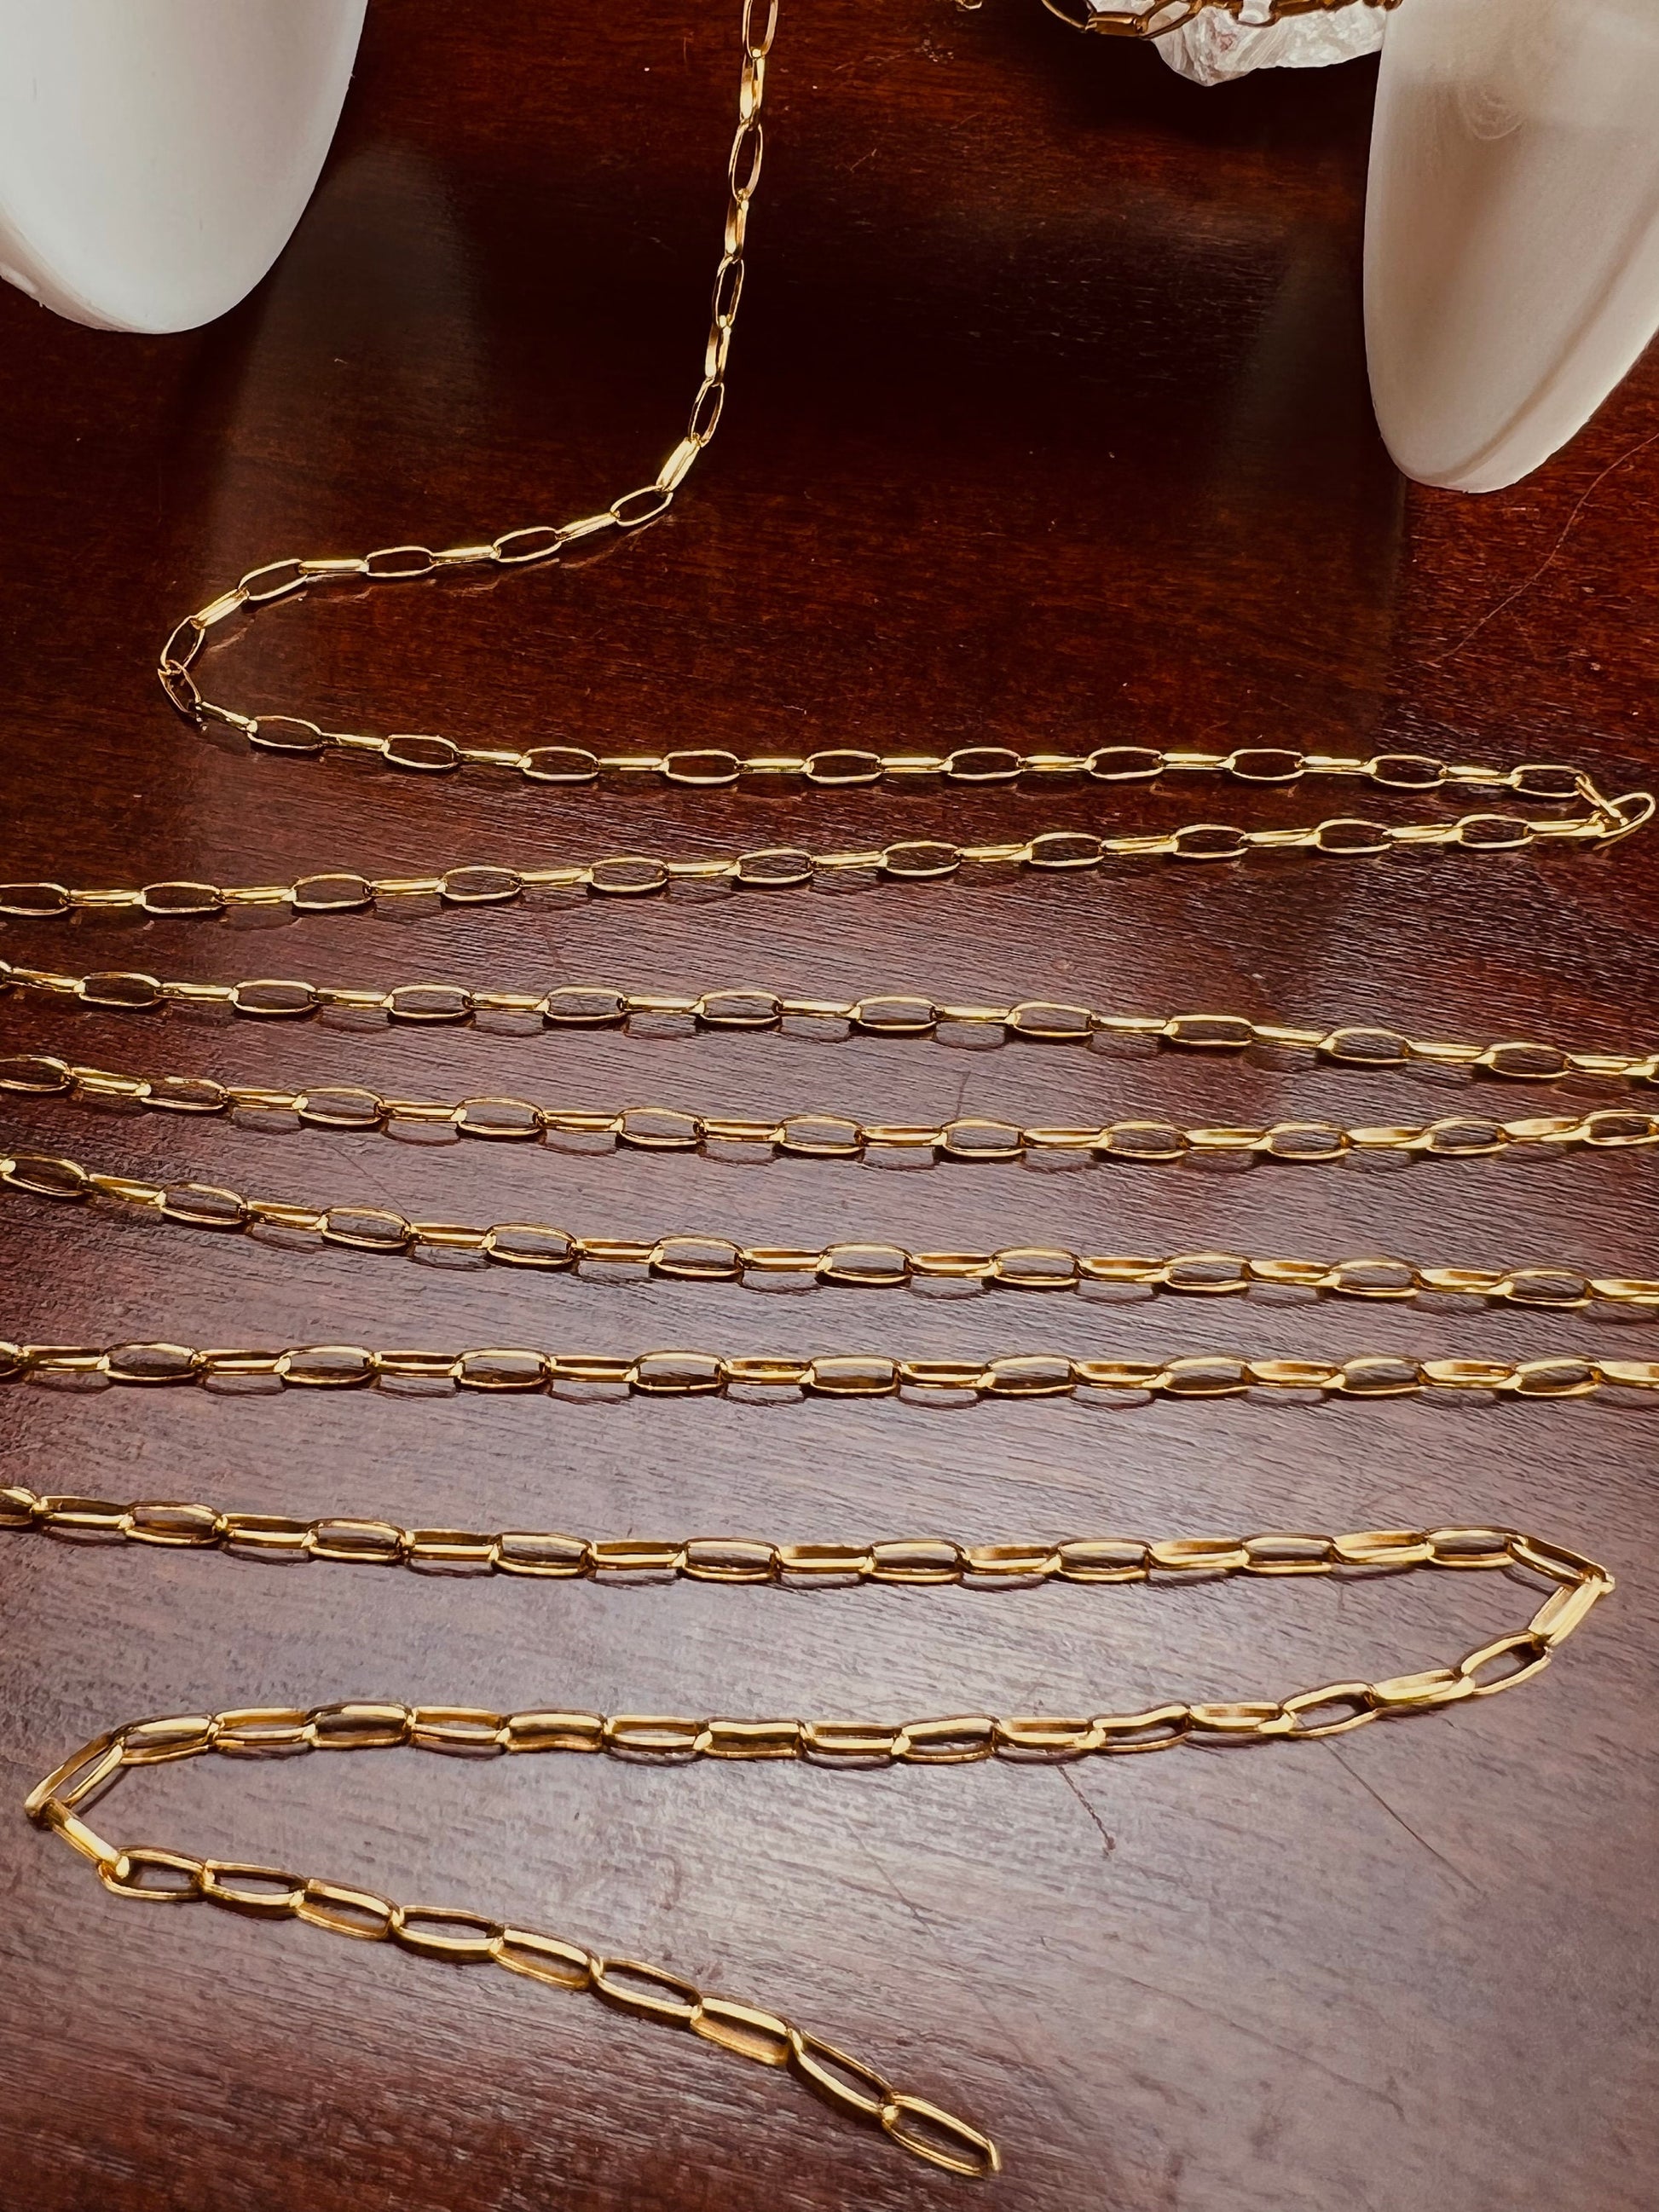 14K Gold Filled long oval Chain 1.6x4.5mm long light weight Jewelry Making Italian Chain